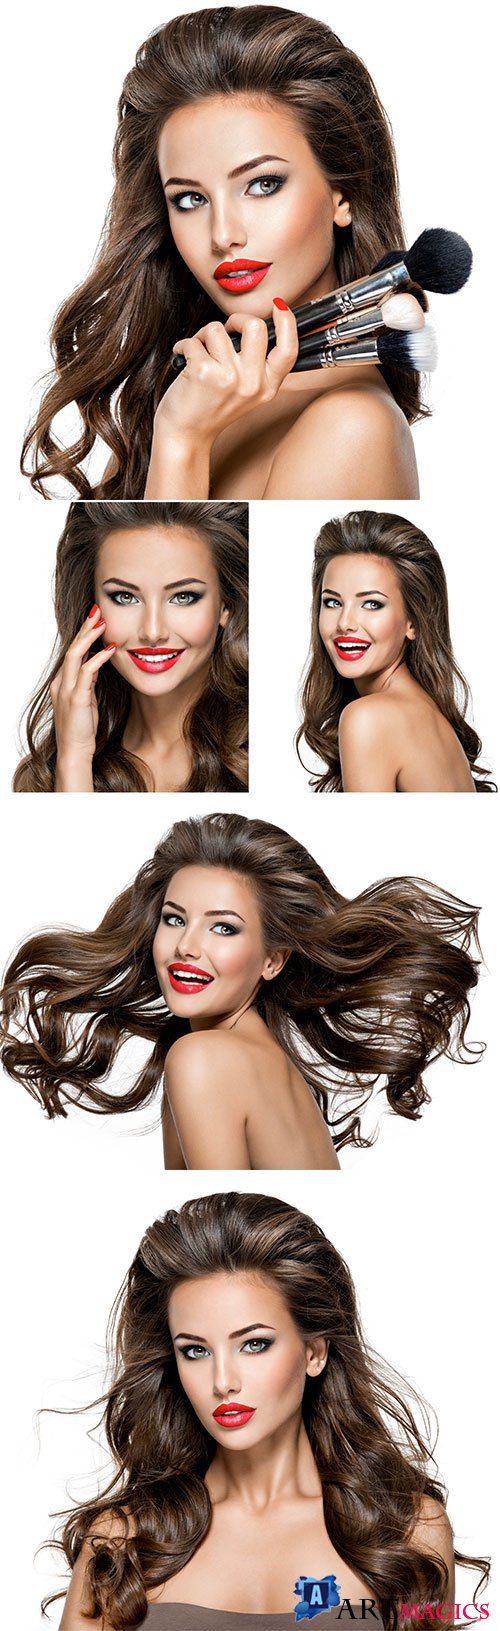 Luxury girl model with red lips and makeup brushes